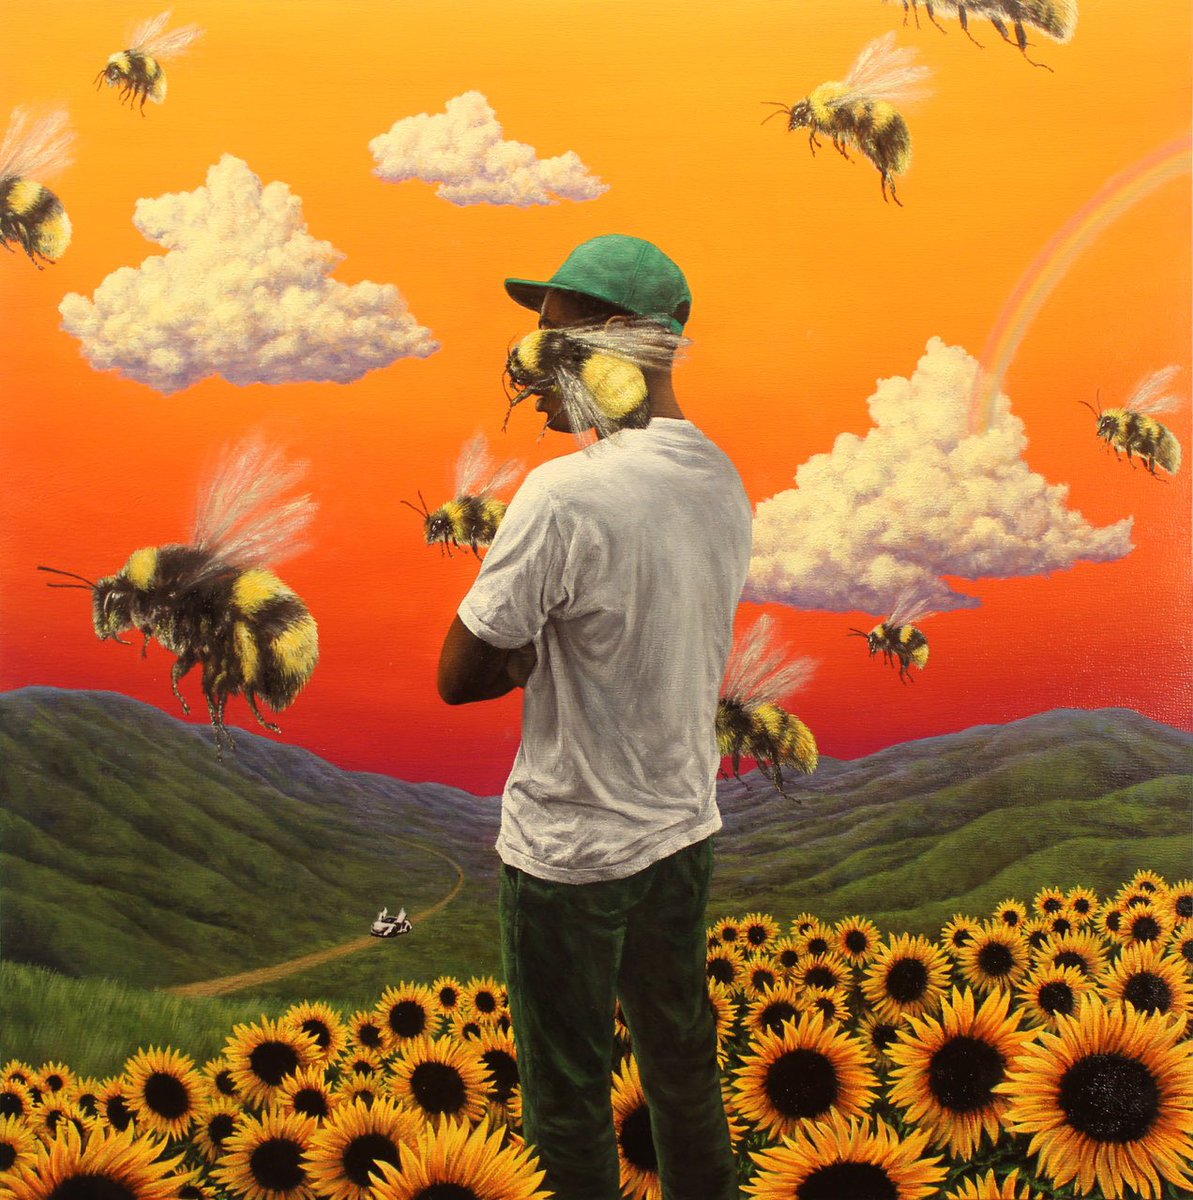 Tyler, The Creator Has A New Album On The Way Titled “Scum Fuck Flower Boy”